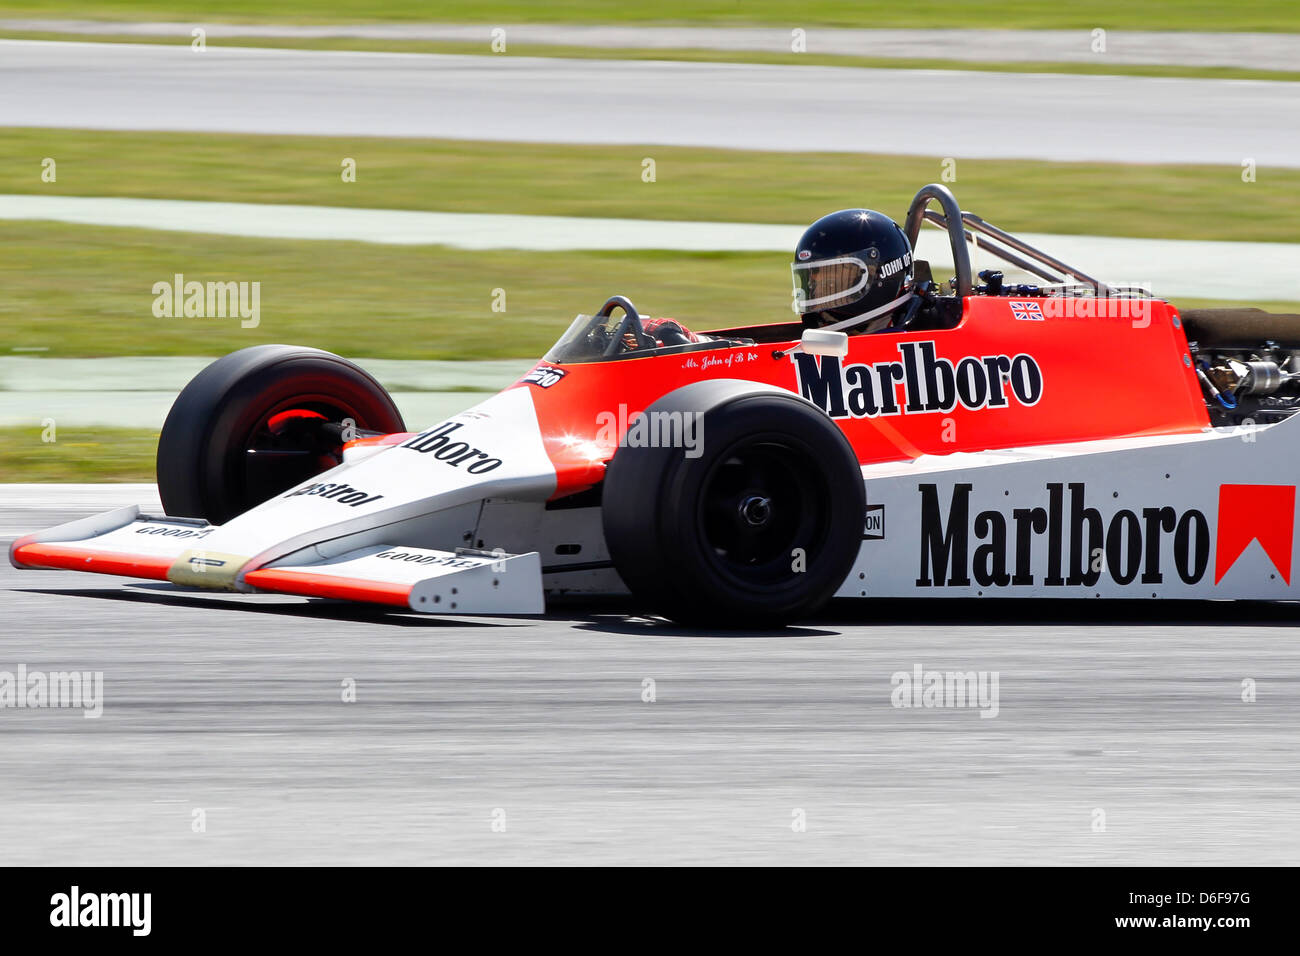 FIA Masters Historic Formula One race at Montmelo 12th April 2013 - Mr John of B in 1980 McLaren M29 Stock Photo